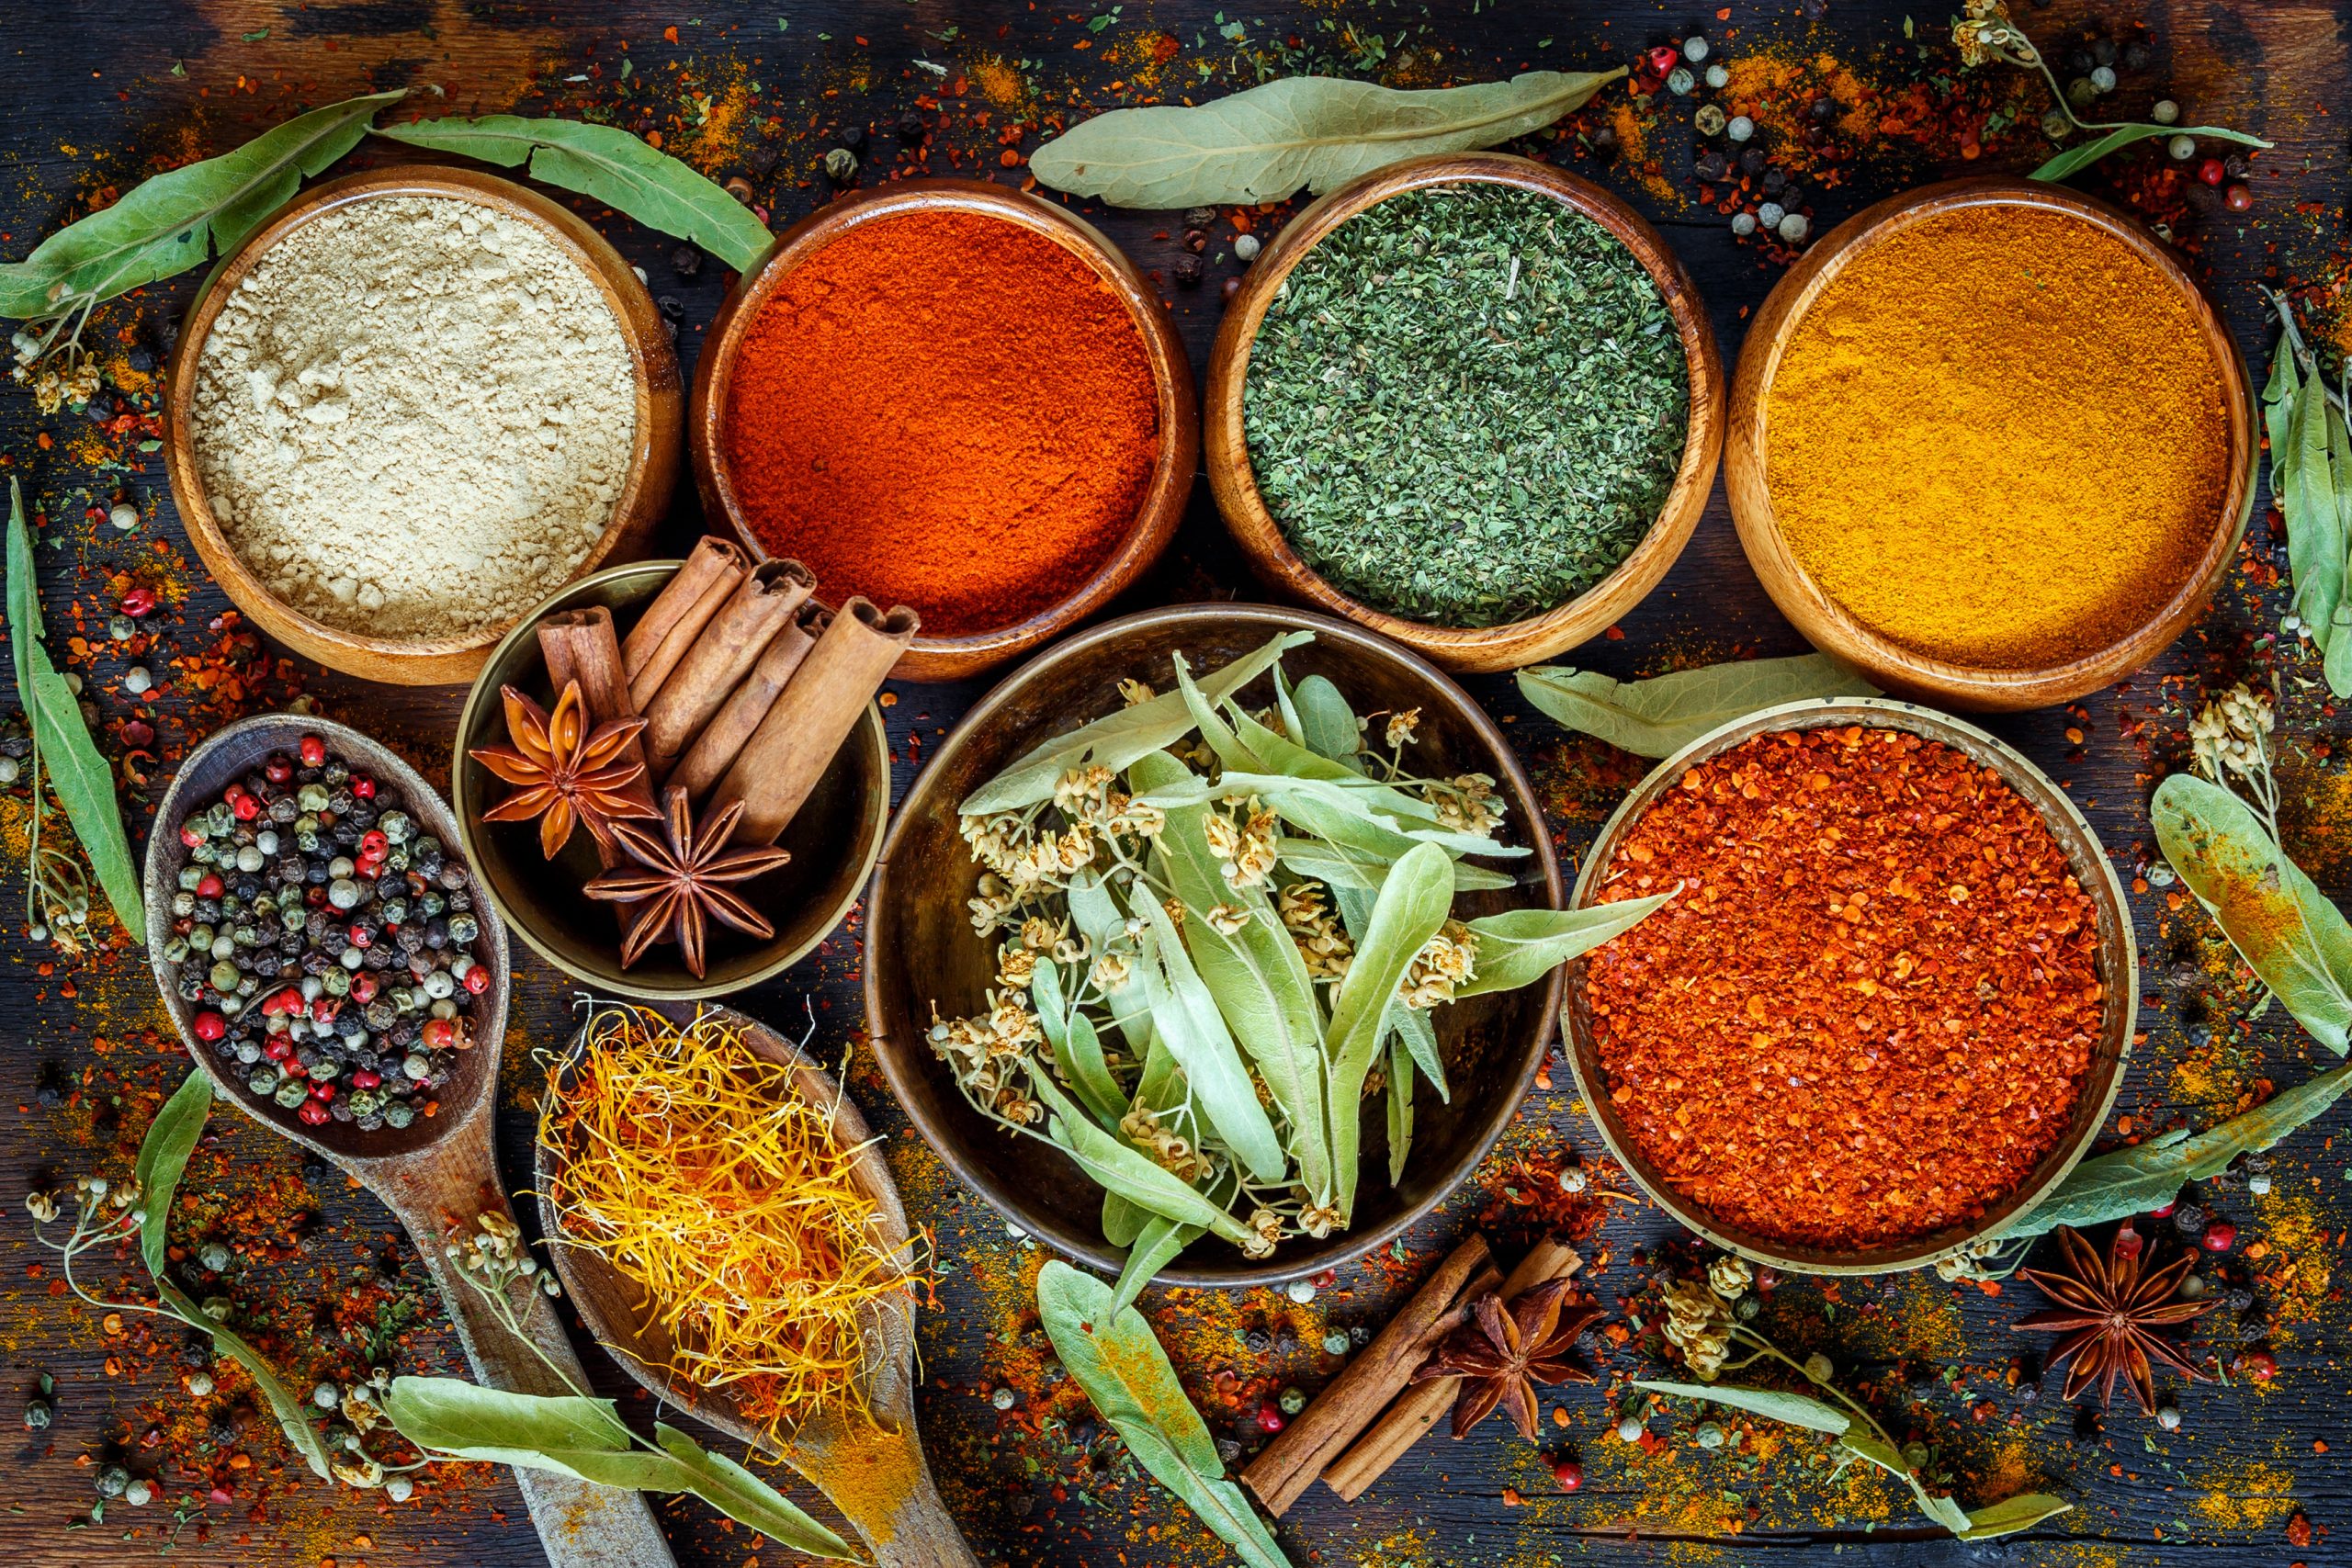 An assortment of spices and herbs displayed in various bowls on a dark wooden surface. The collection includes powdered and whole spices like cinnamon sticks, star anise, and dried bay leaves, with colorful spices such as bright red paprika, golden turmeric, and green dried herbs creating a vibrant contrast. Spilled spices sprinkle the area, adding to the rustic and aromatic atmosphere.